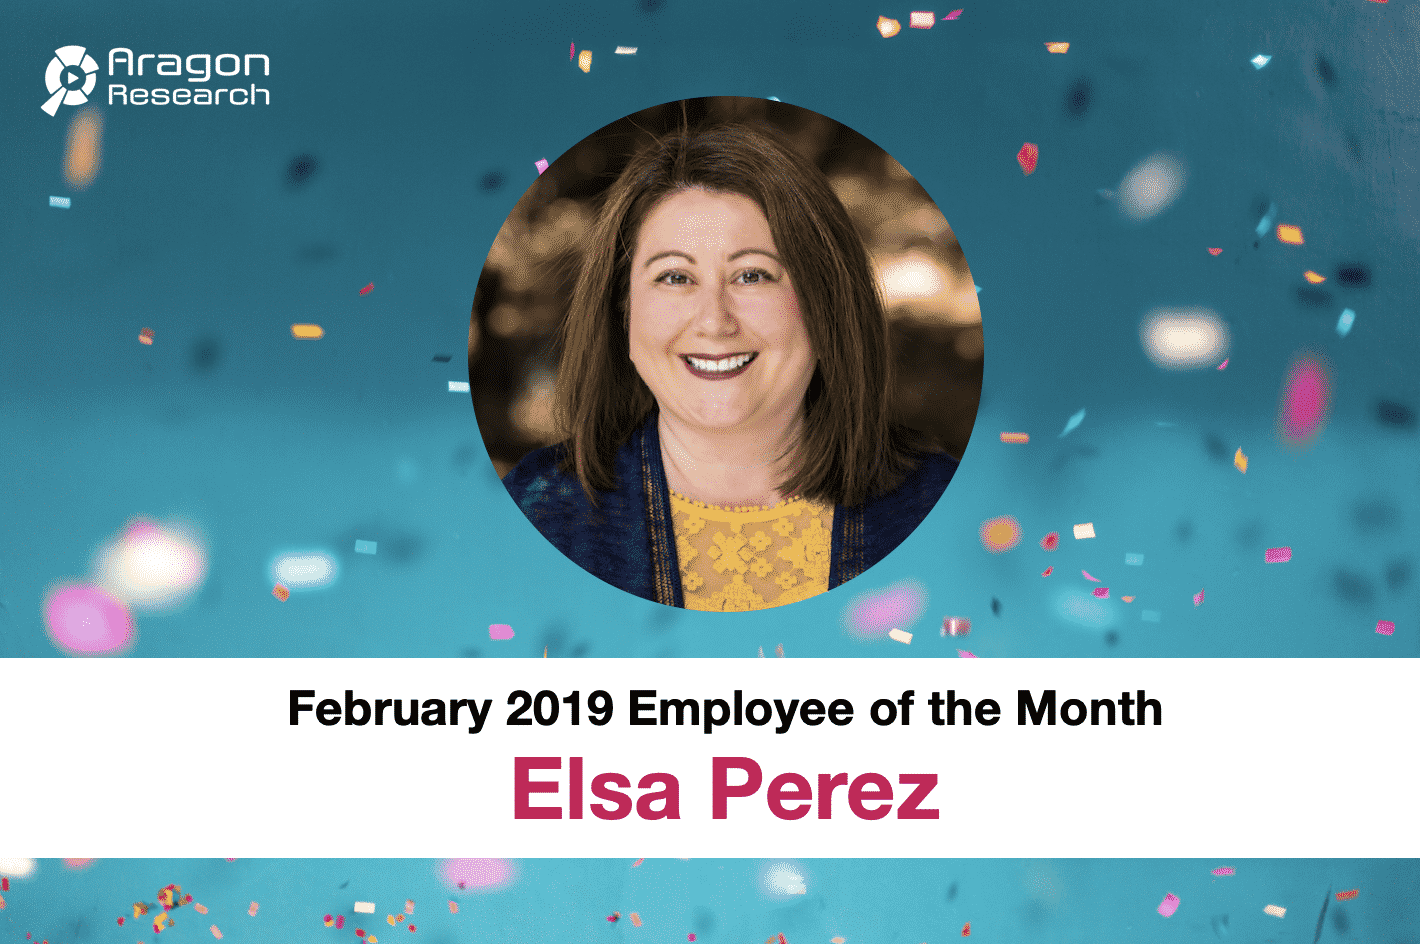 aragon research employee of the month february 2019